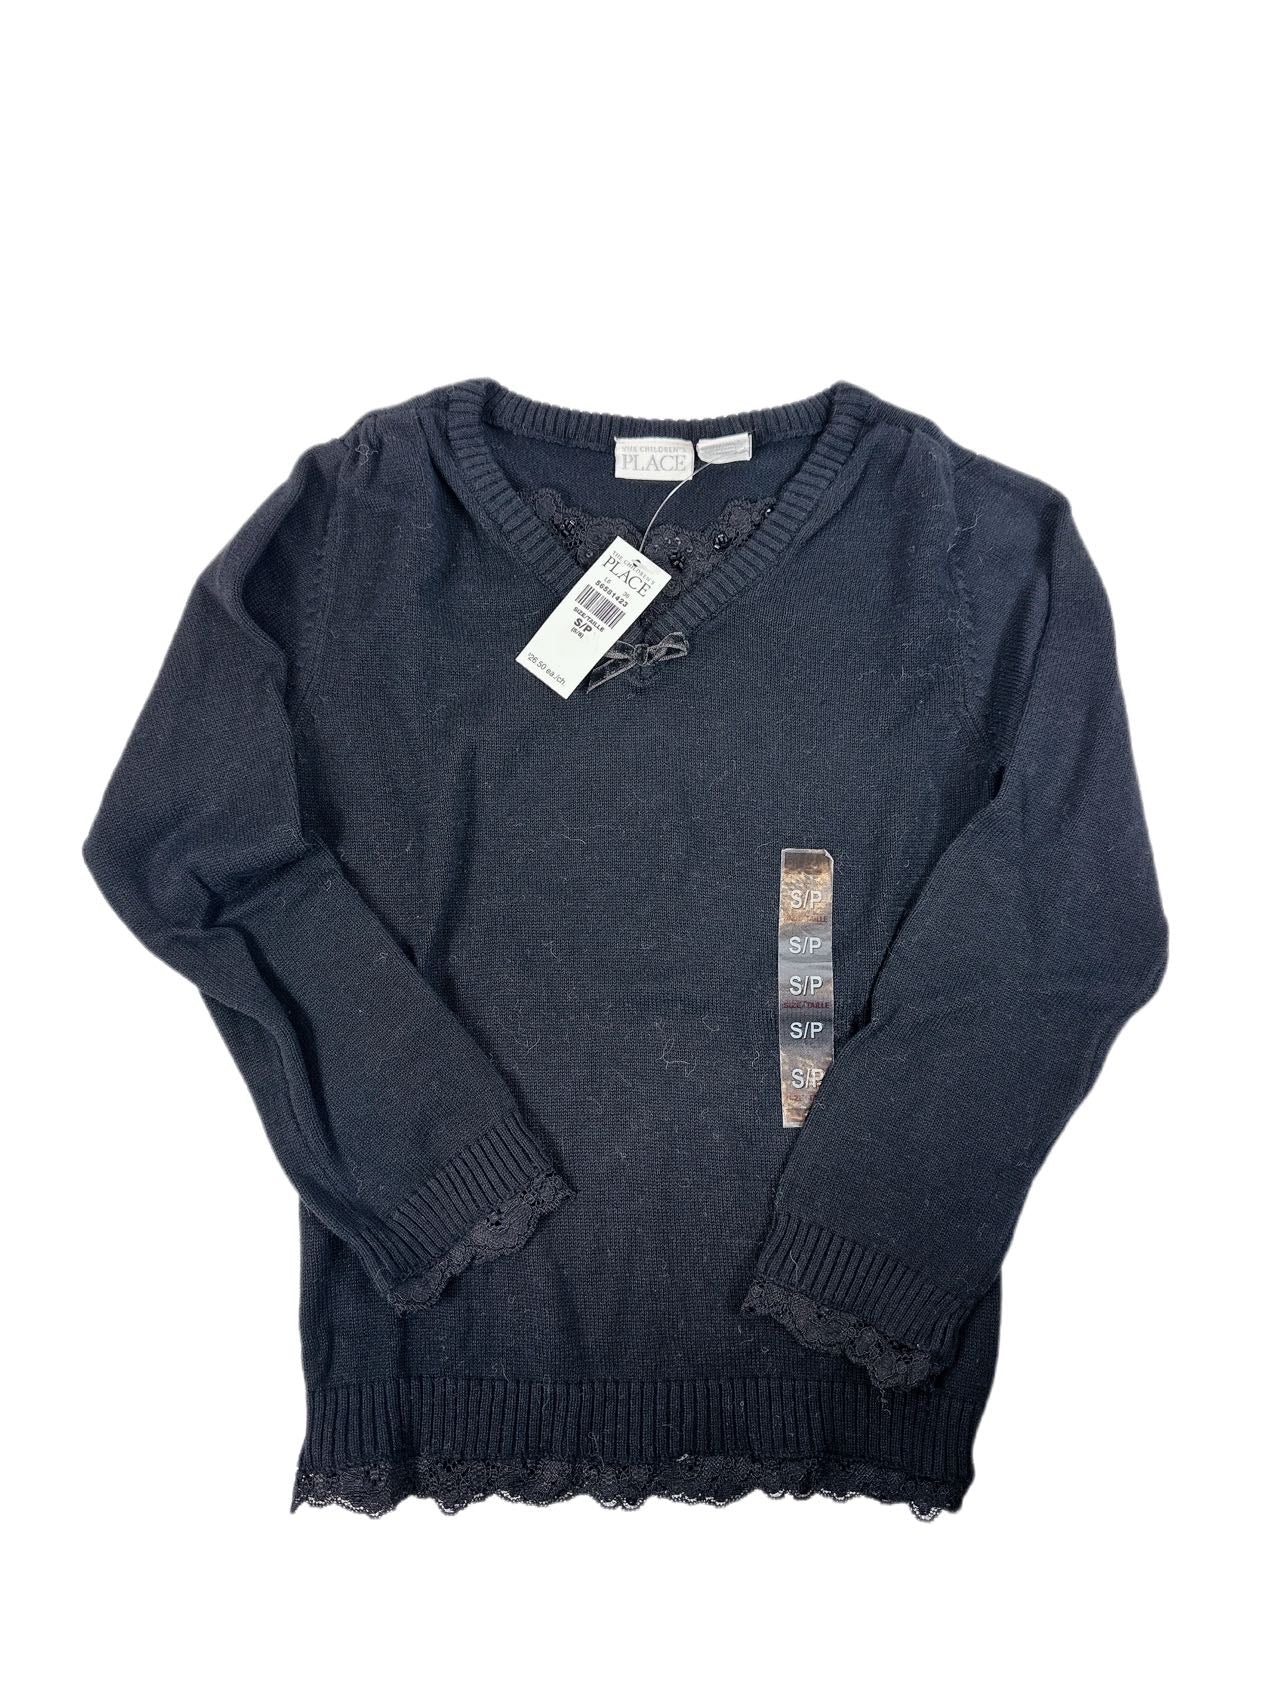 The Children Place Girl Lace Black Sweater(5Y)-Unworn